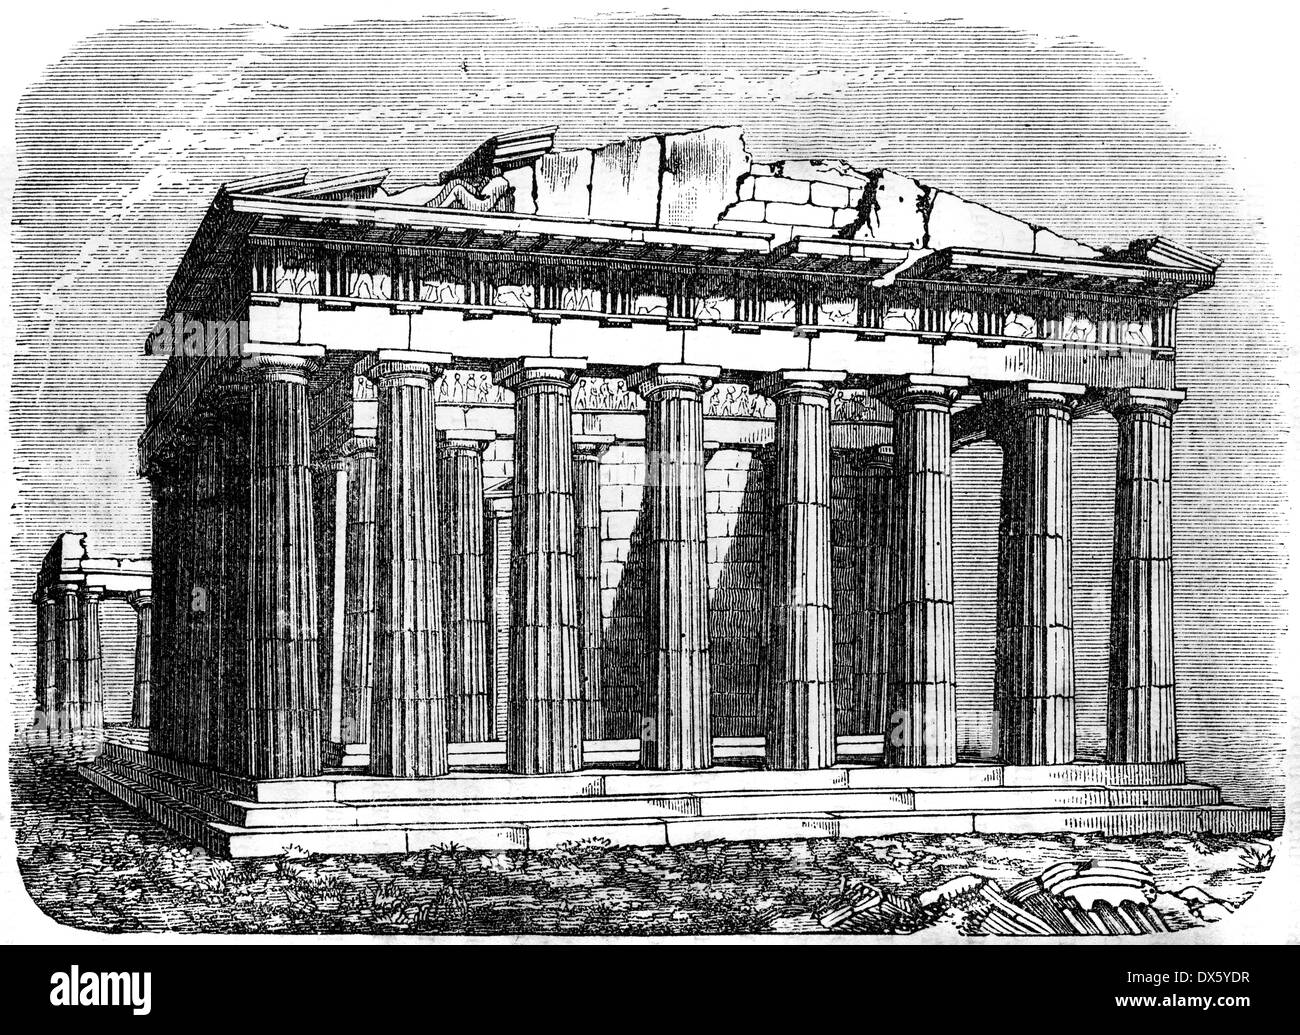 Greek Parthenon, Athens, Greece, illustration from book dated 1878 Stock Photo